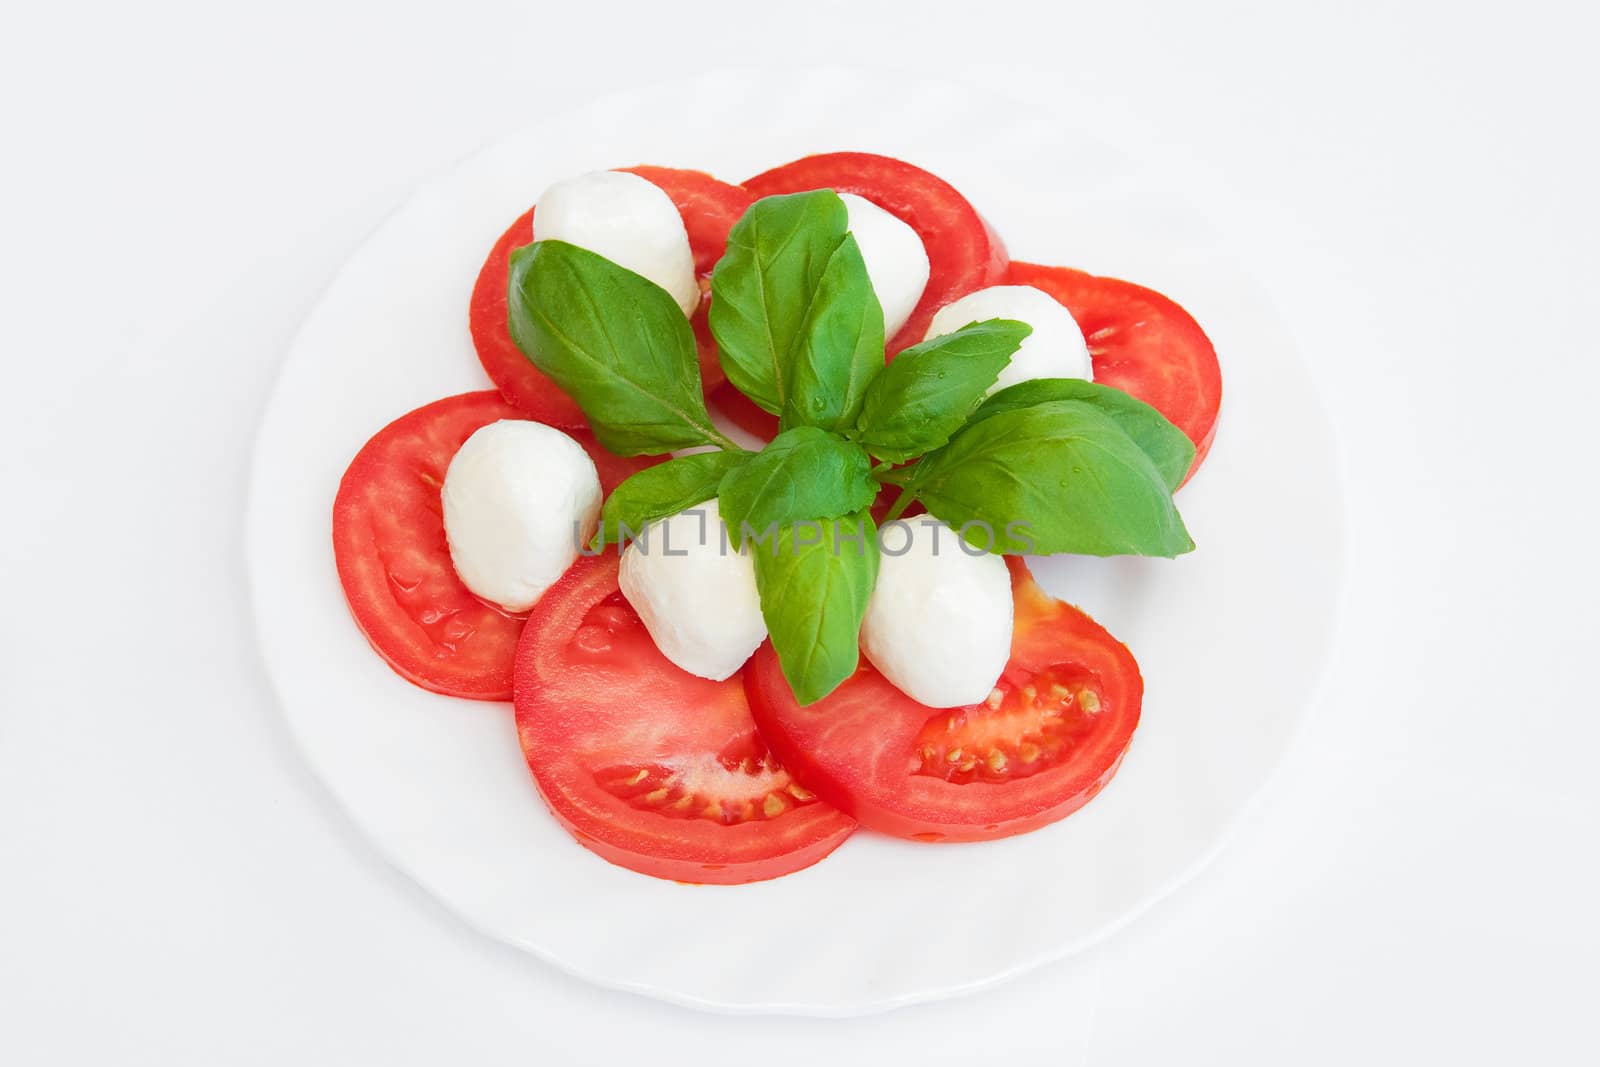 Tomatoes with mozzarella by Yaurinko